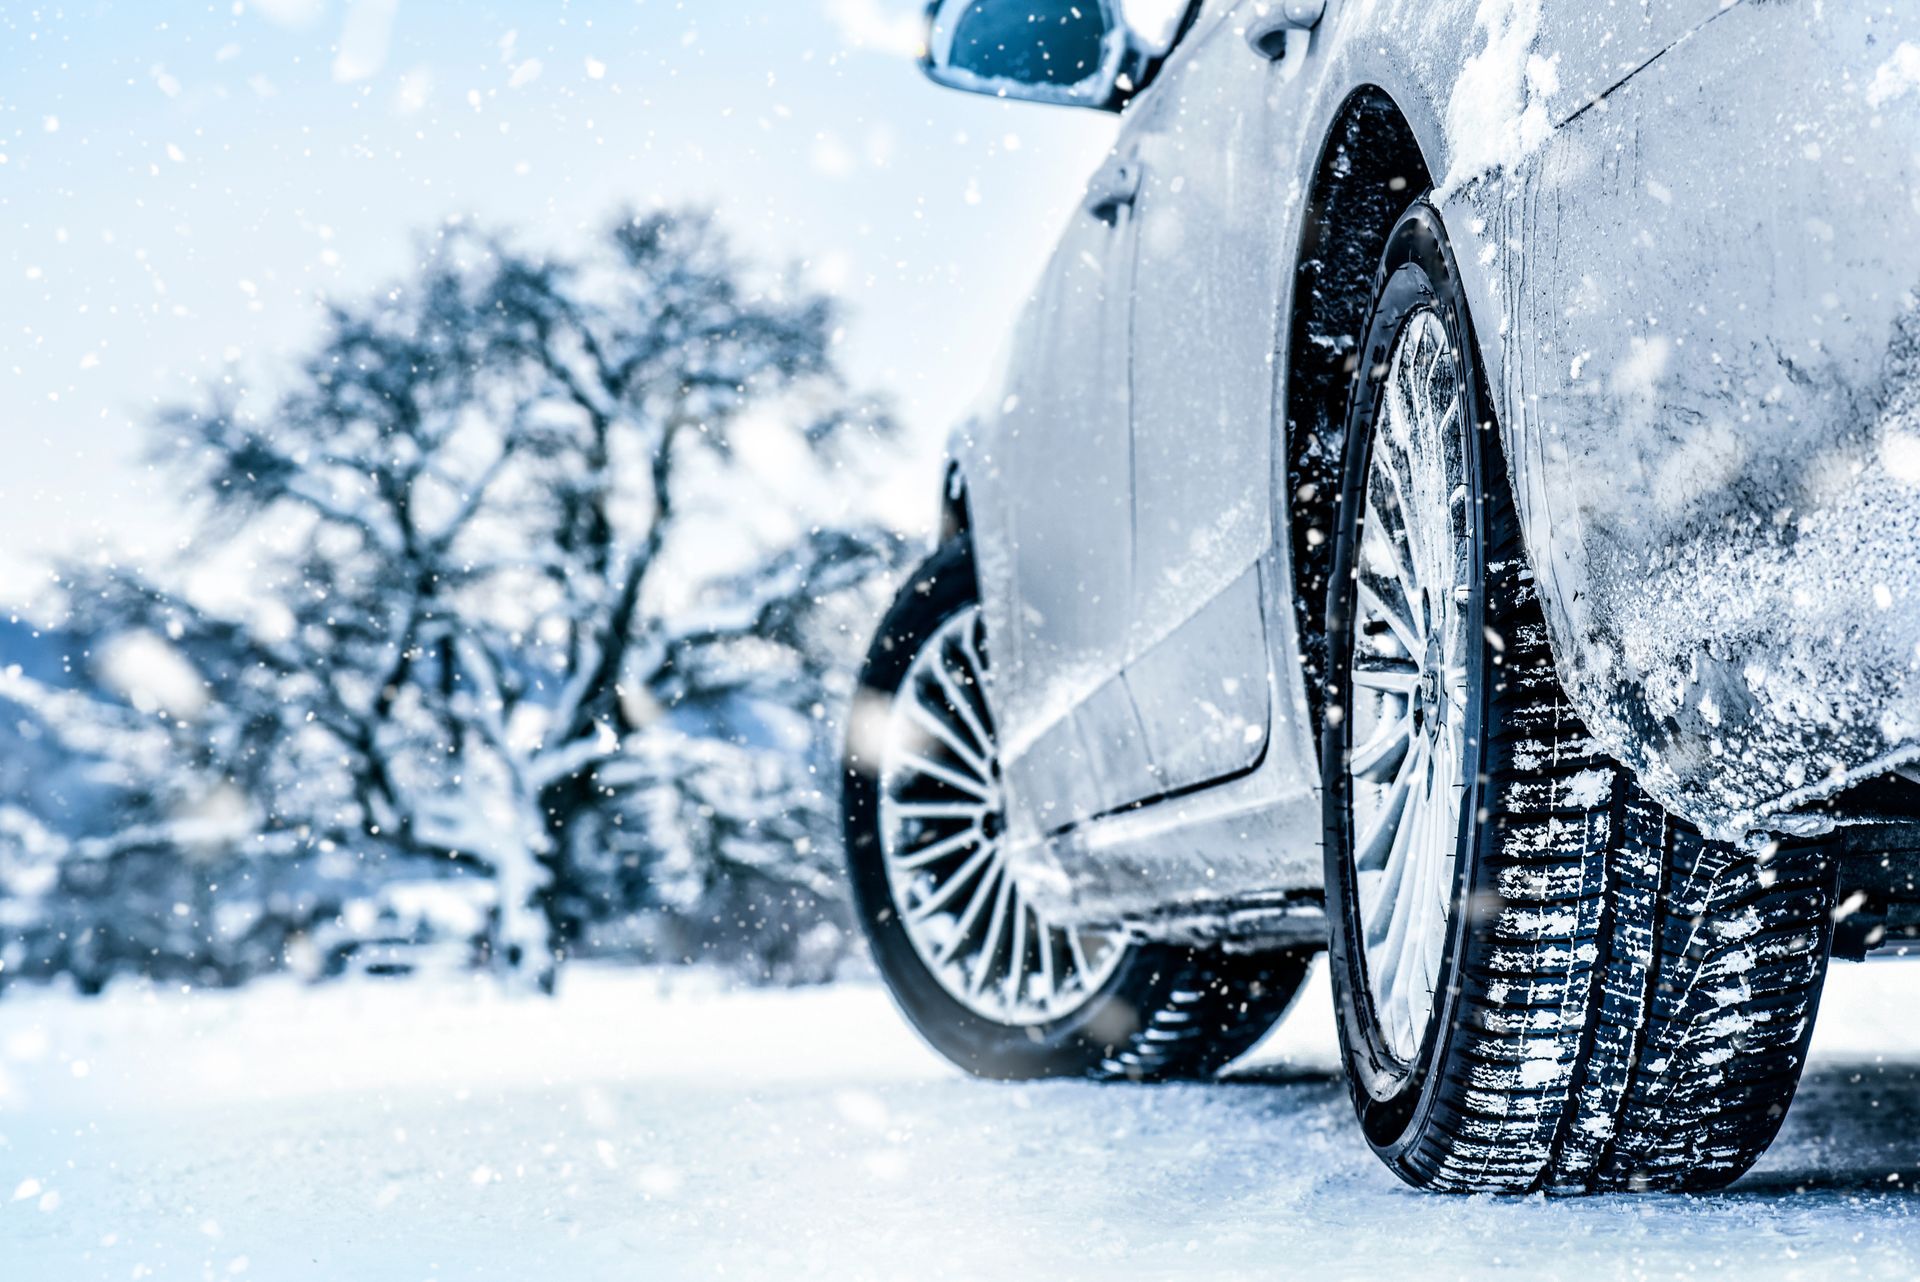 Which European Cars Are Best For Winter? - Performance Auto Specialists